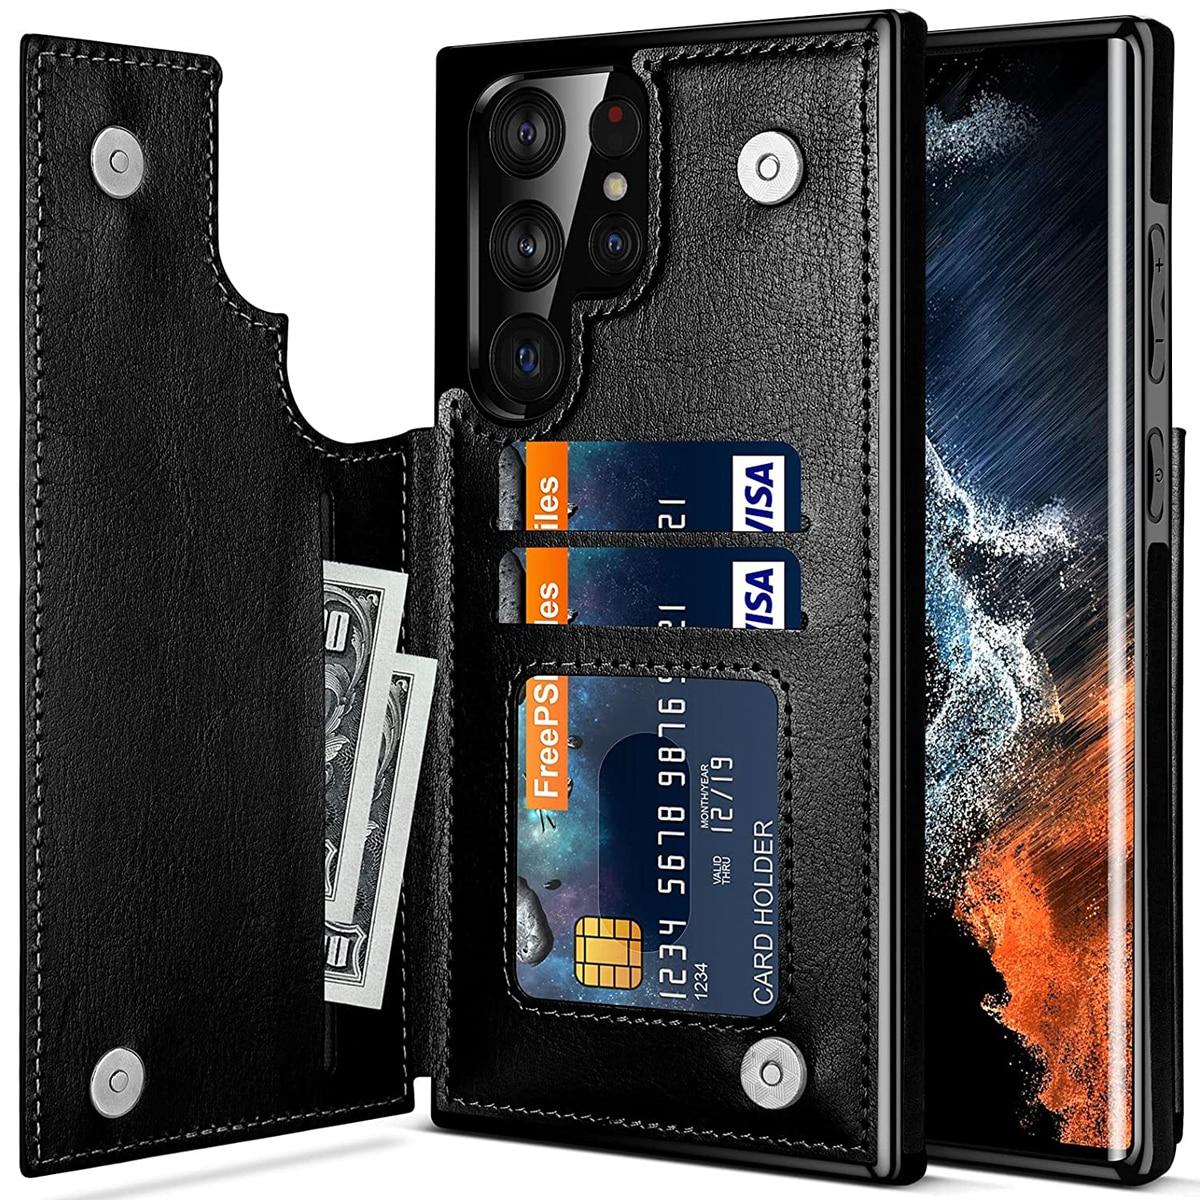 fashion Digital Accessories For Samsung Galaxy S22 S21 S23 Ultra S20 FE S10 S9 S8 plus A12 A22 A32 A52 A51 A71 A20E A30 A50 A70 Wallet Case Slot Holder PU Leather Magnetic Case